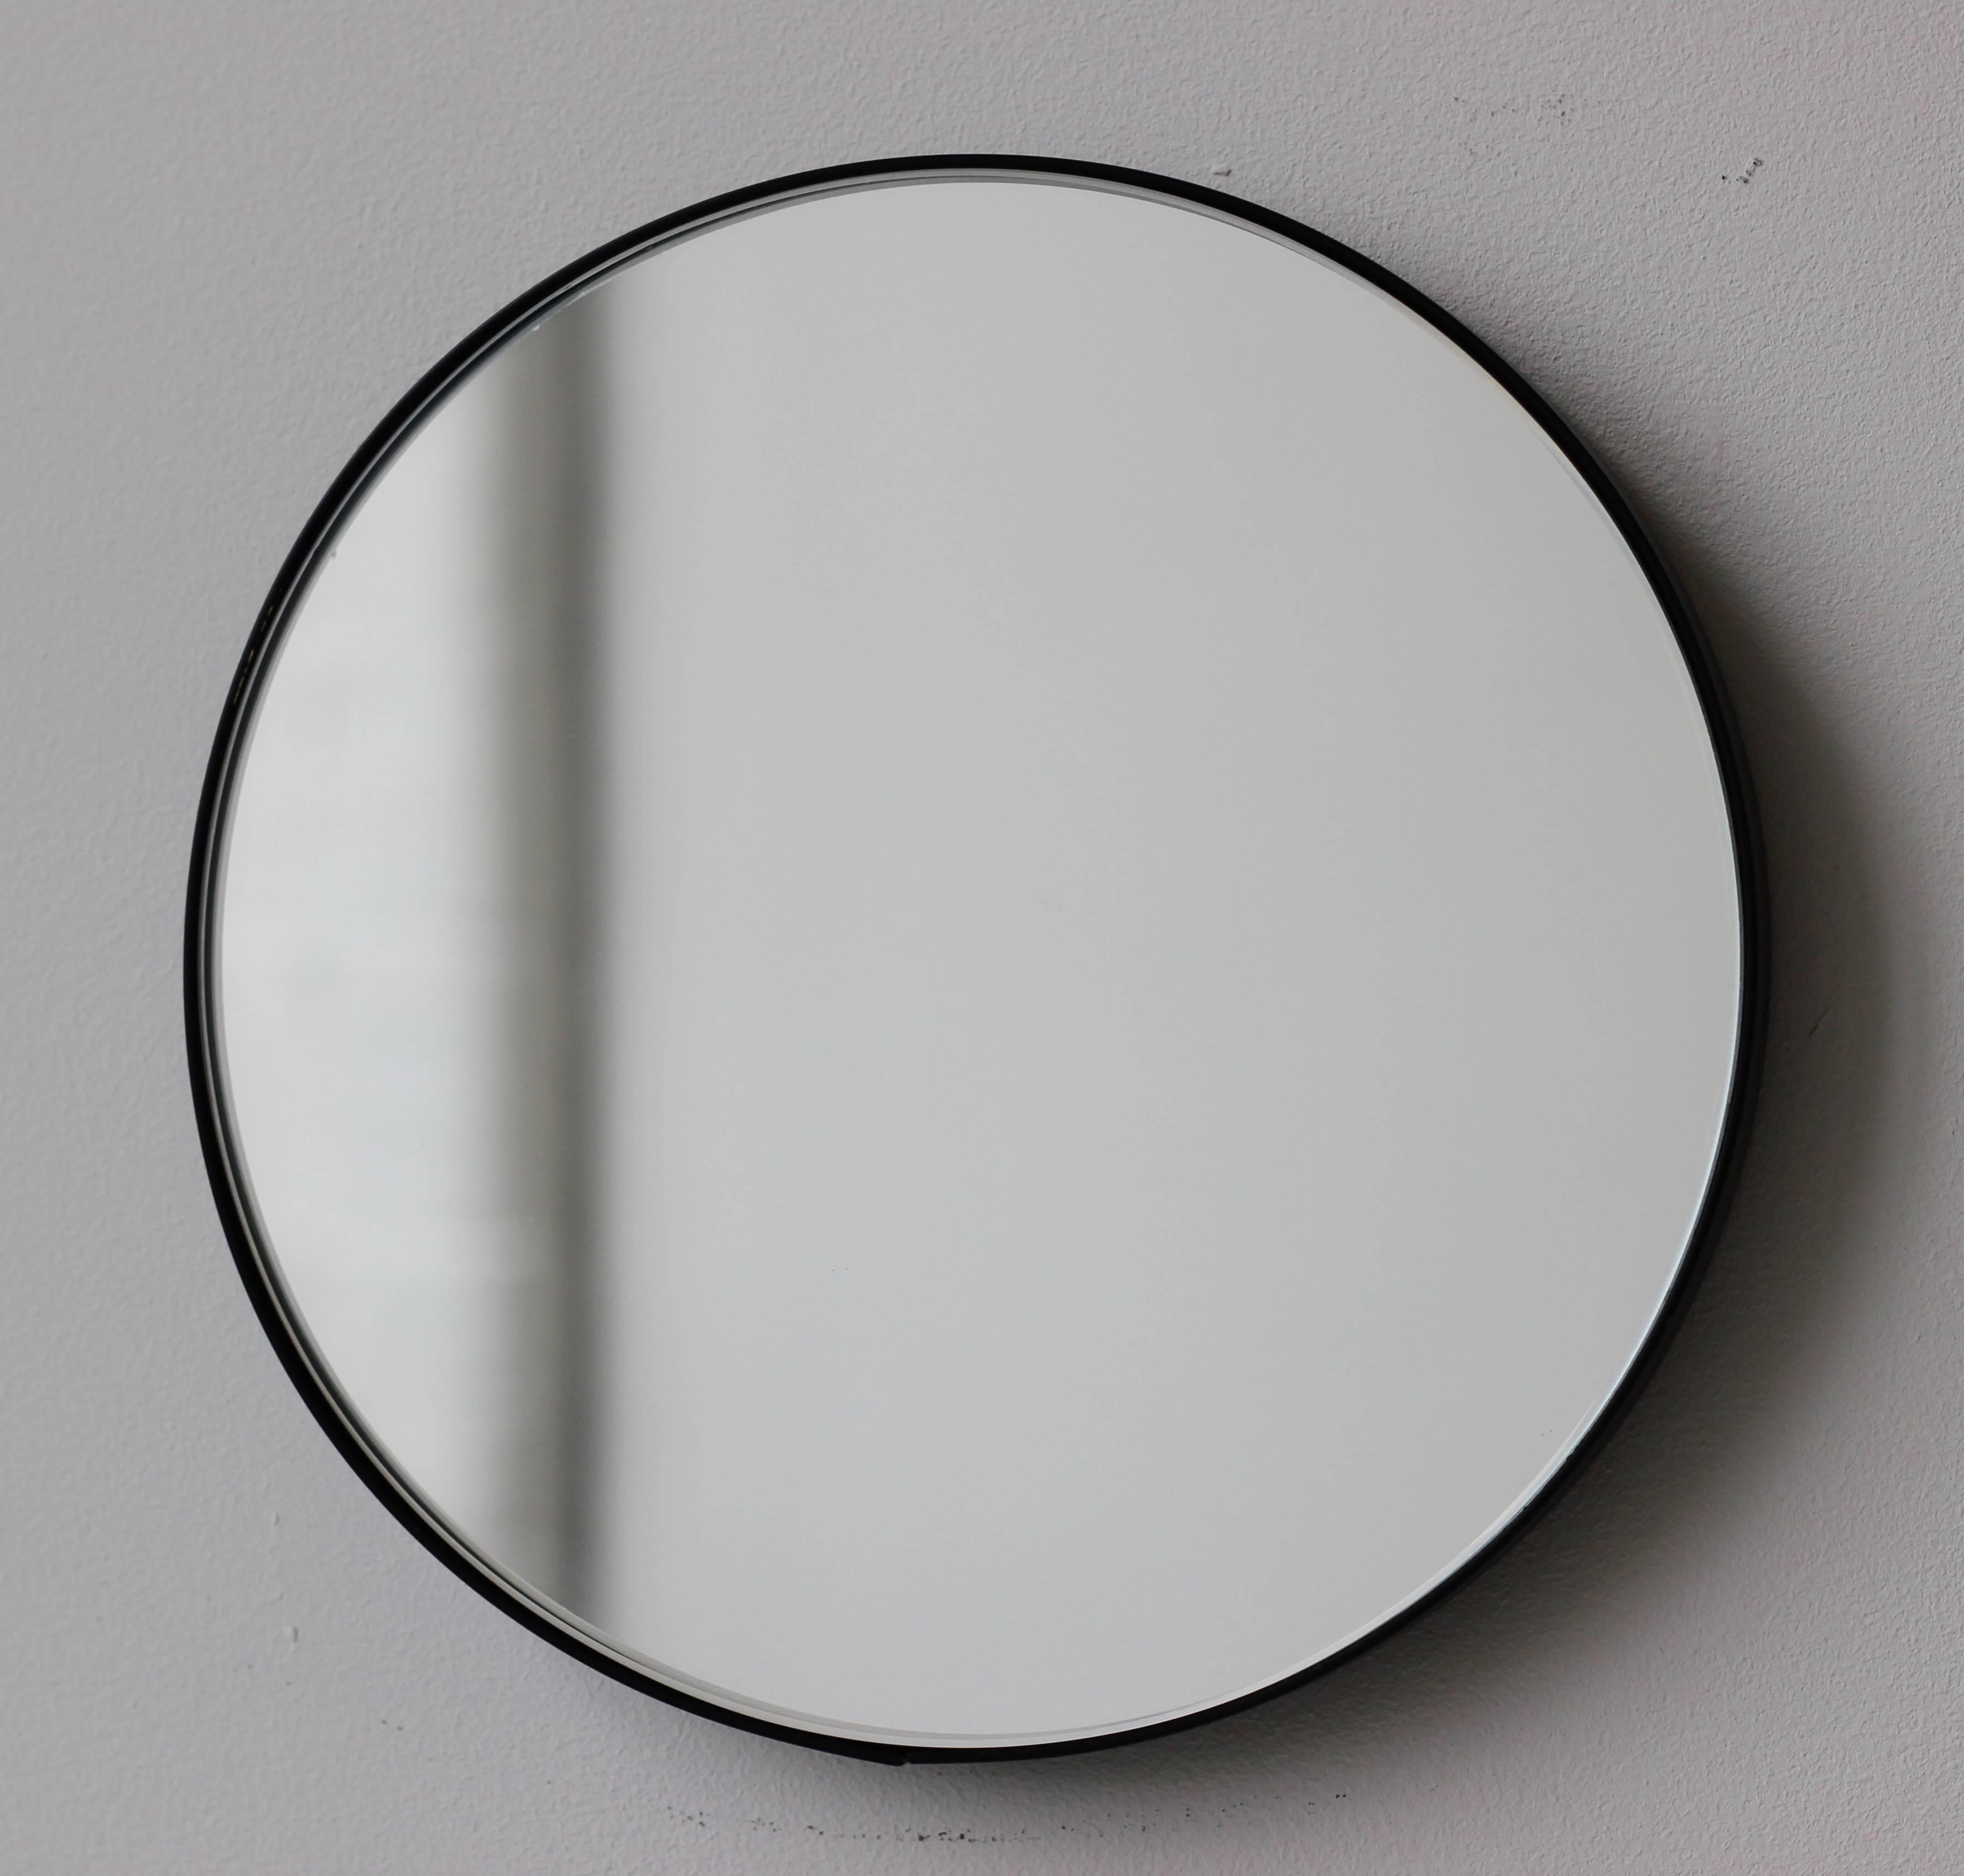 Minimalist Orbis™ round mirror with an elegant aluminium powder coated black frame. Designed and handcrafted in London, UK.

Our mirrors are designed with an integrated French cleat (split batten) system that ensures the mirror is securely mounted